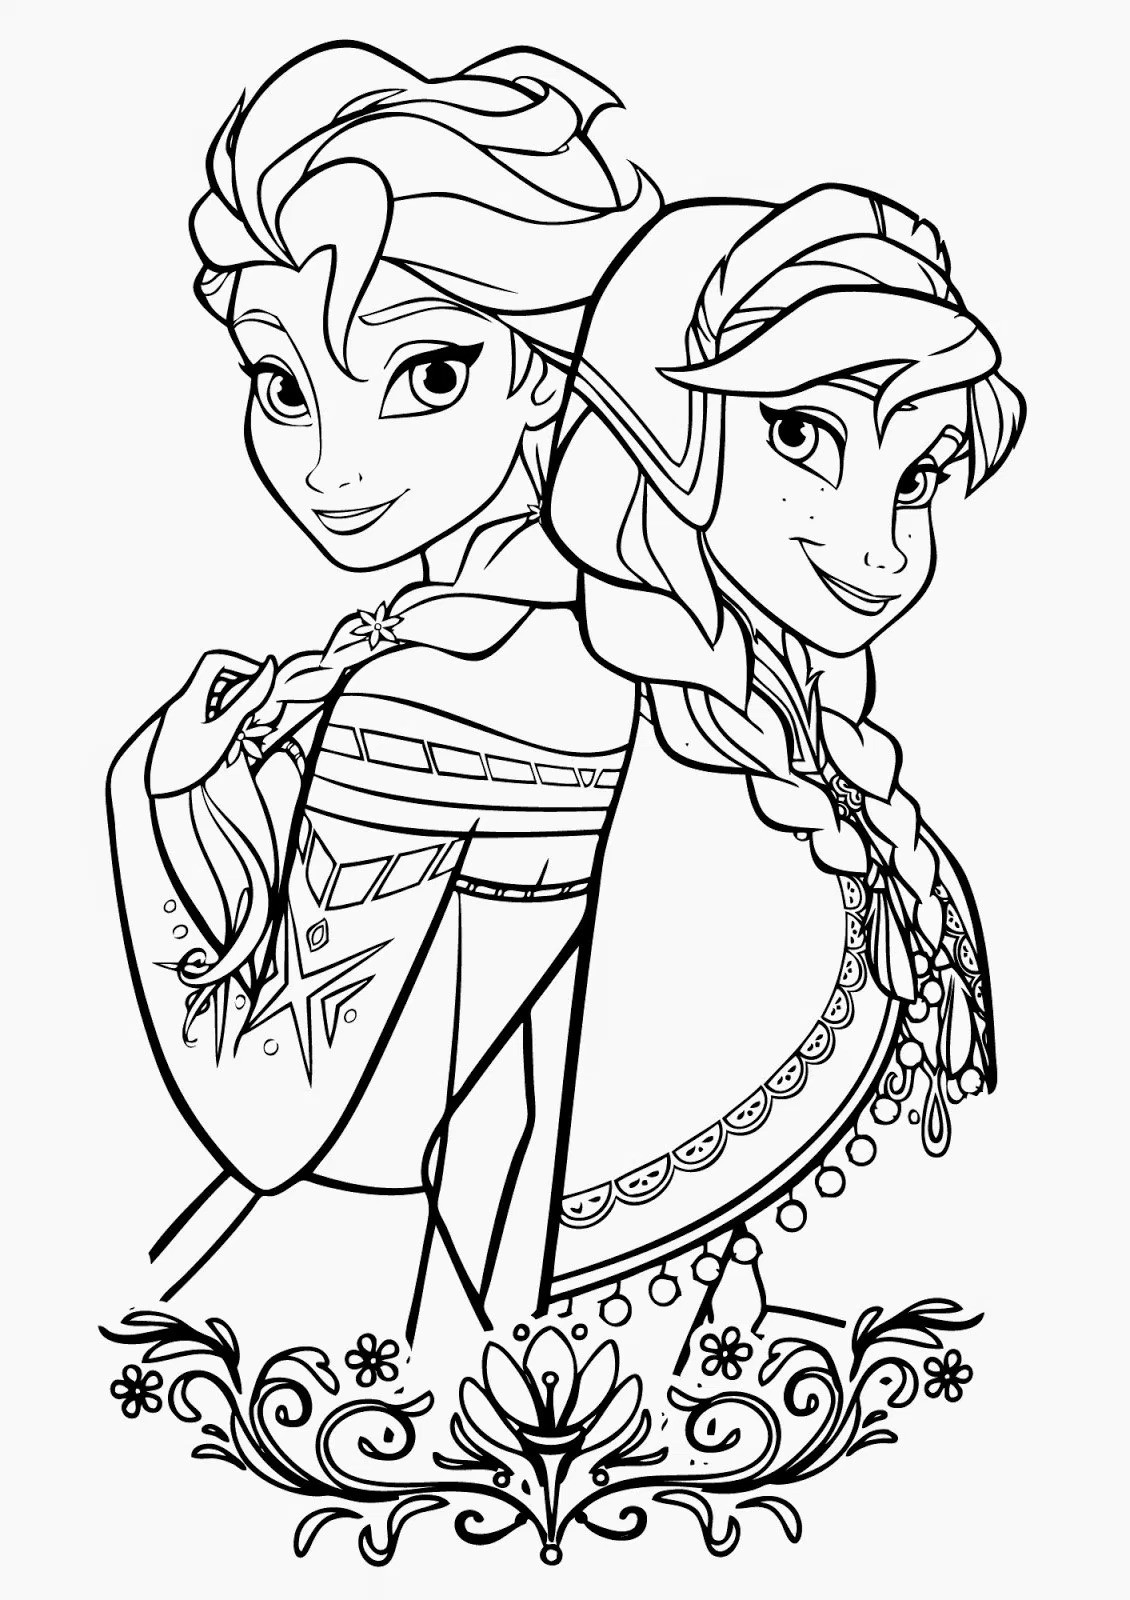 Elsa And Olaf Coloring Pages at GetColorings.com | Free printable